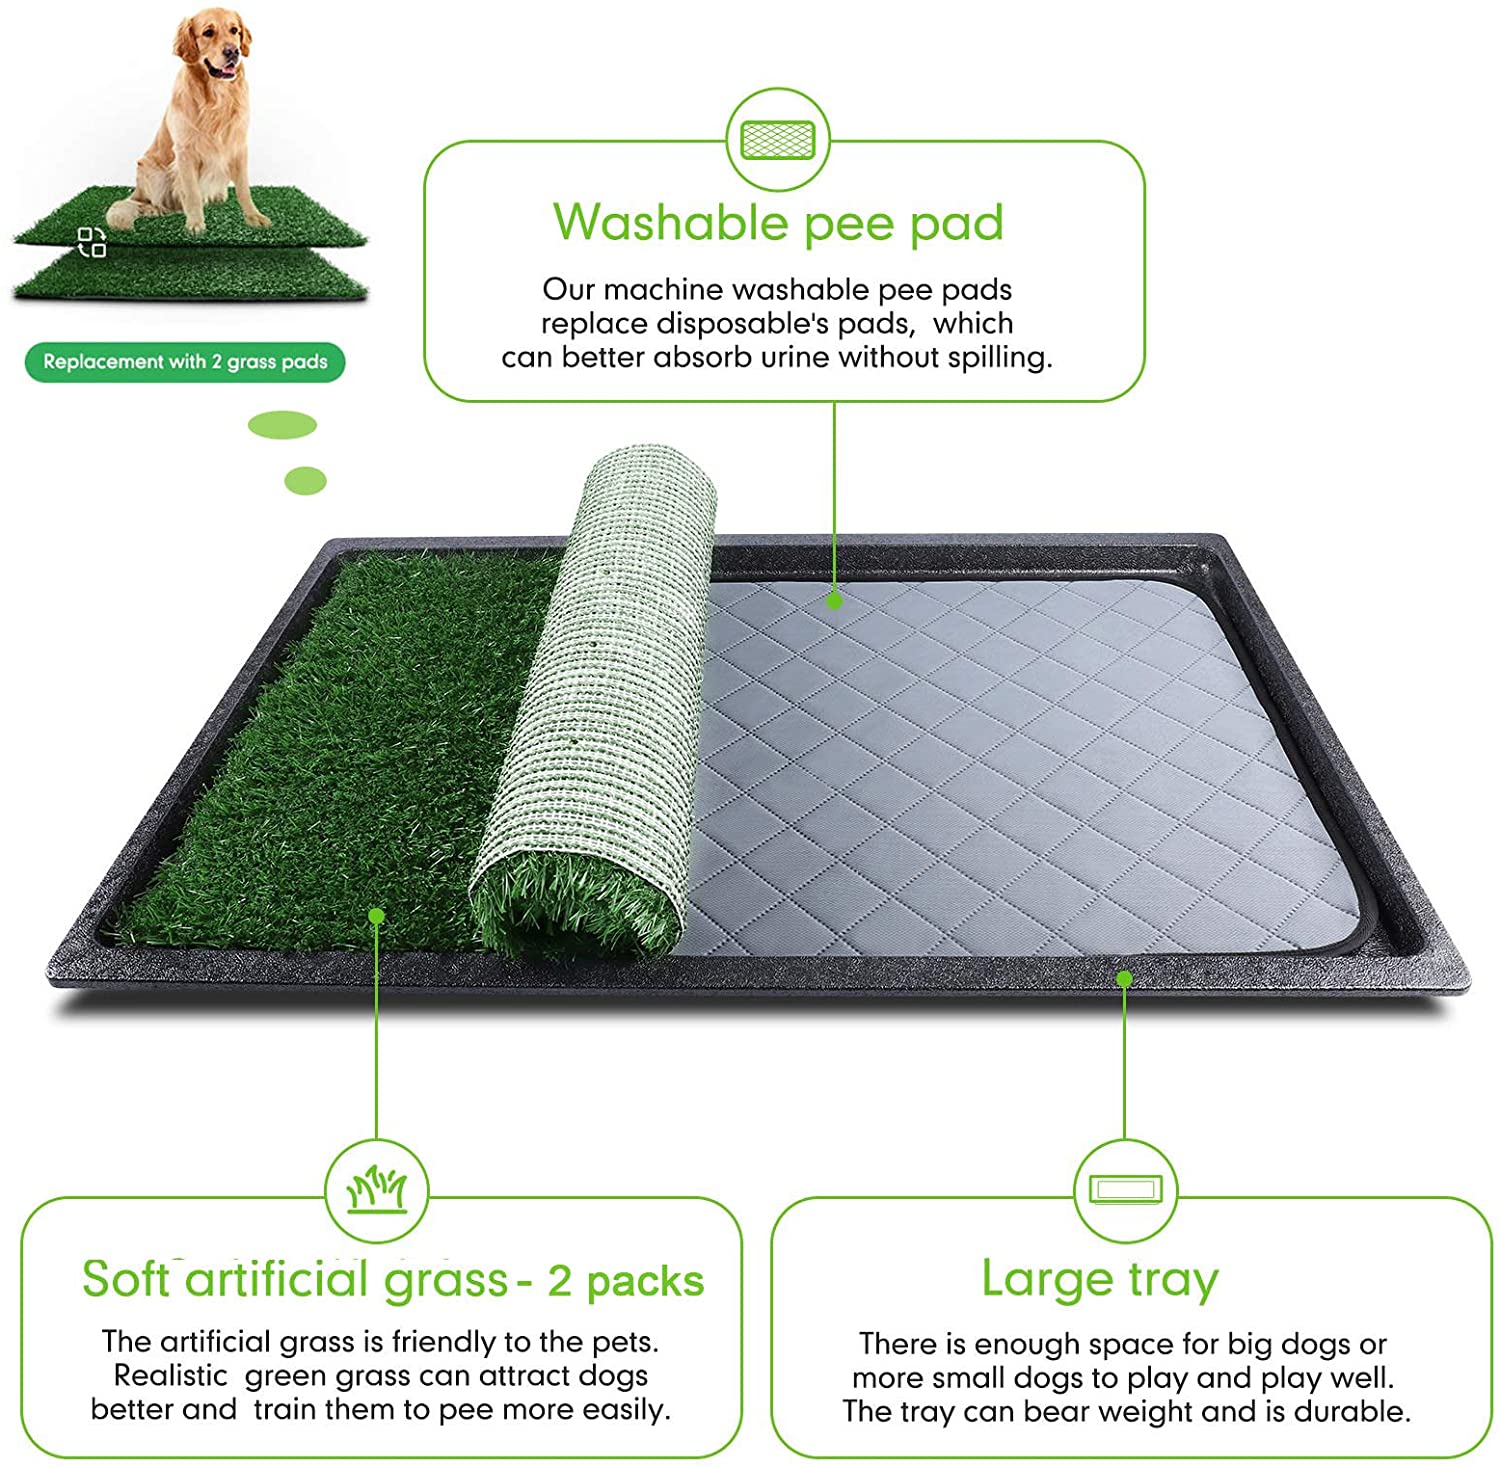 5 Best Artificial Grass For Dog Potty For Cleaner, Healthier Households